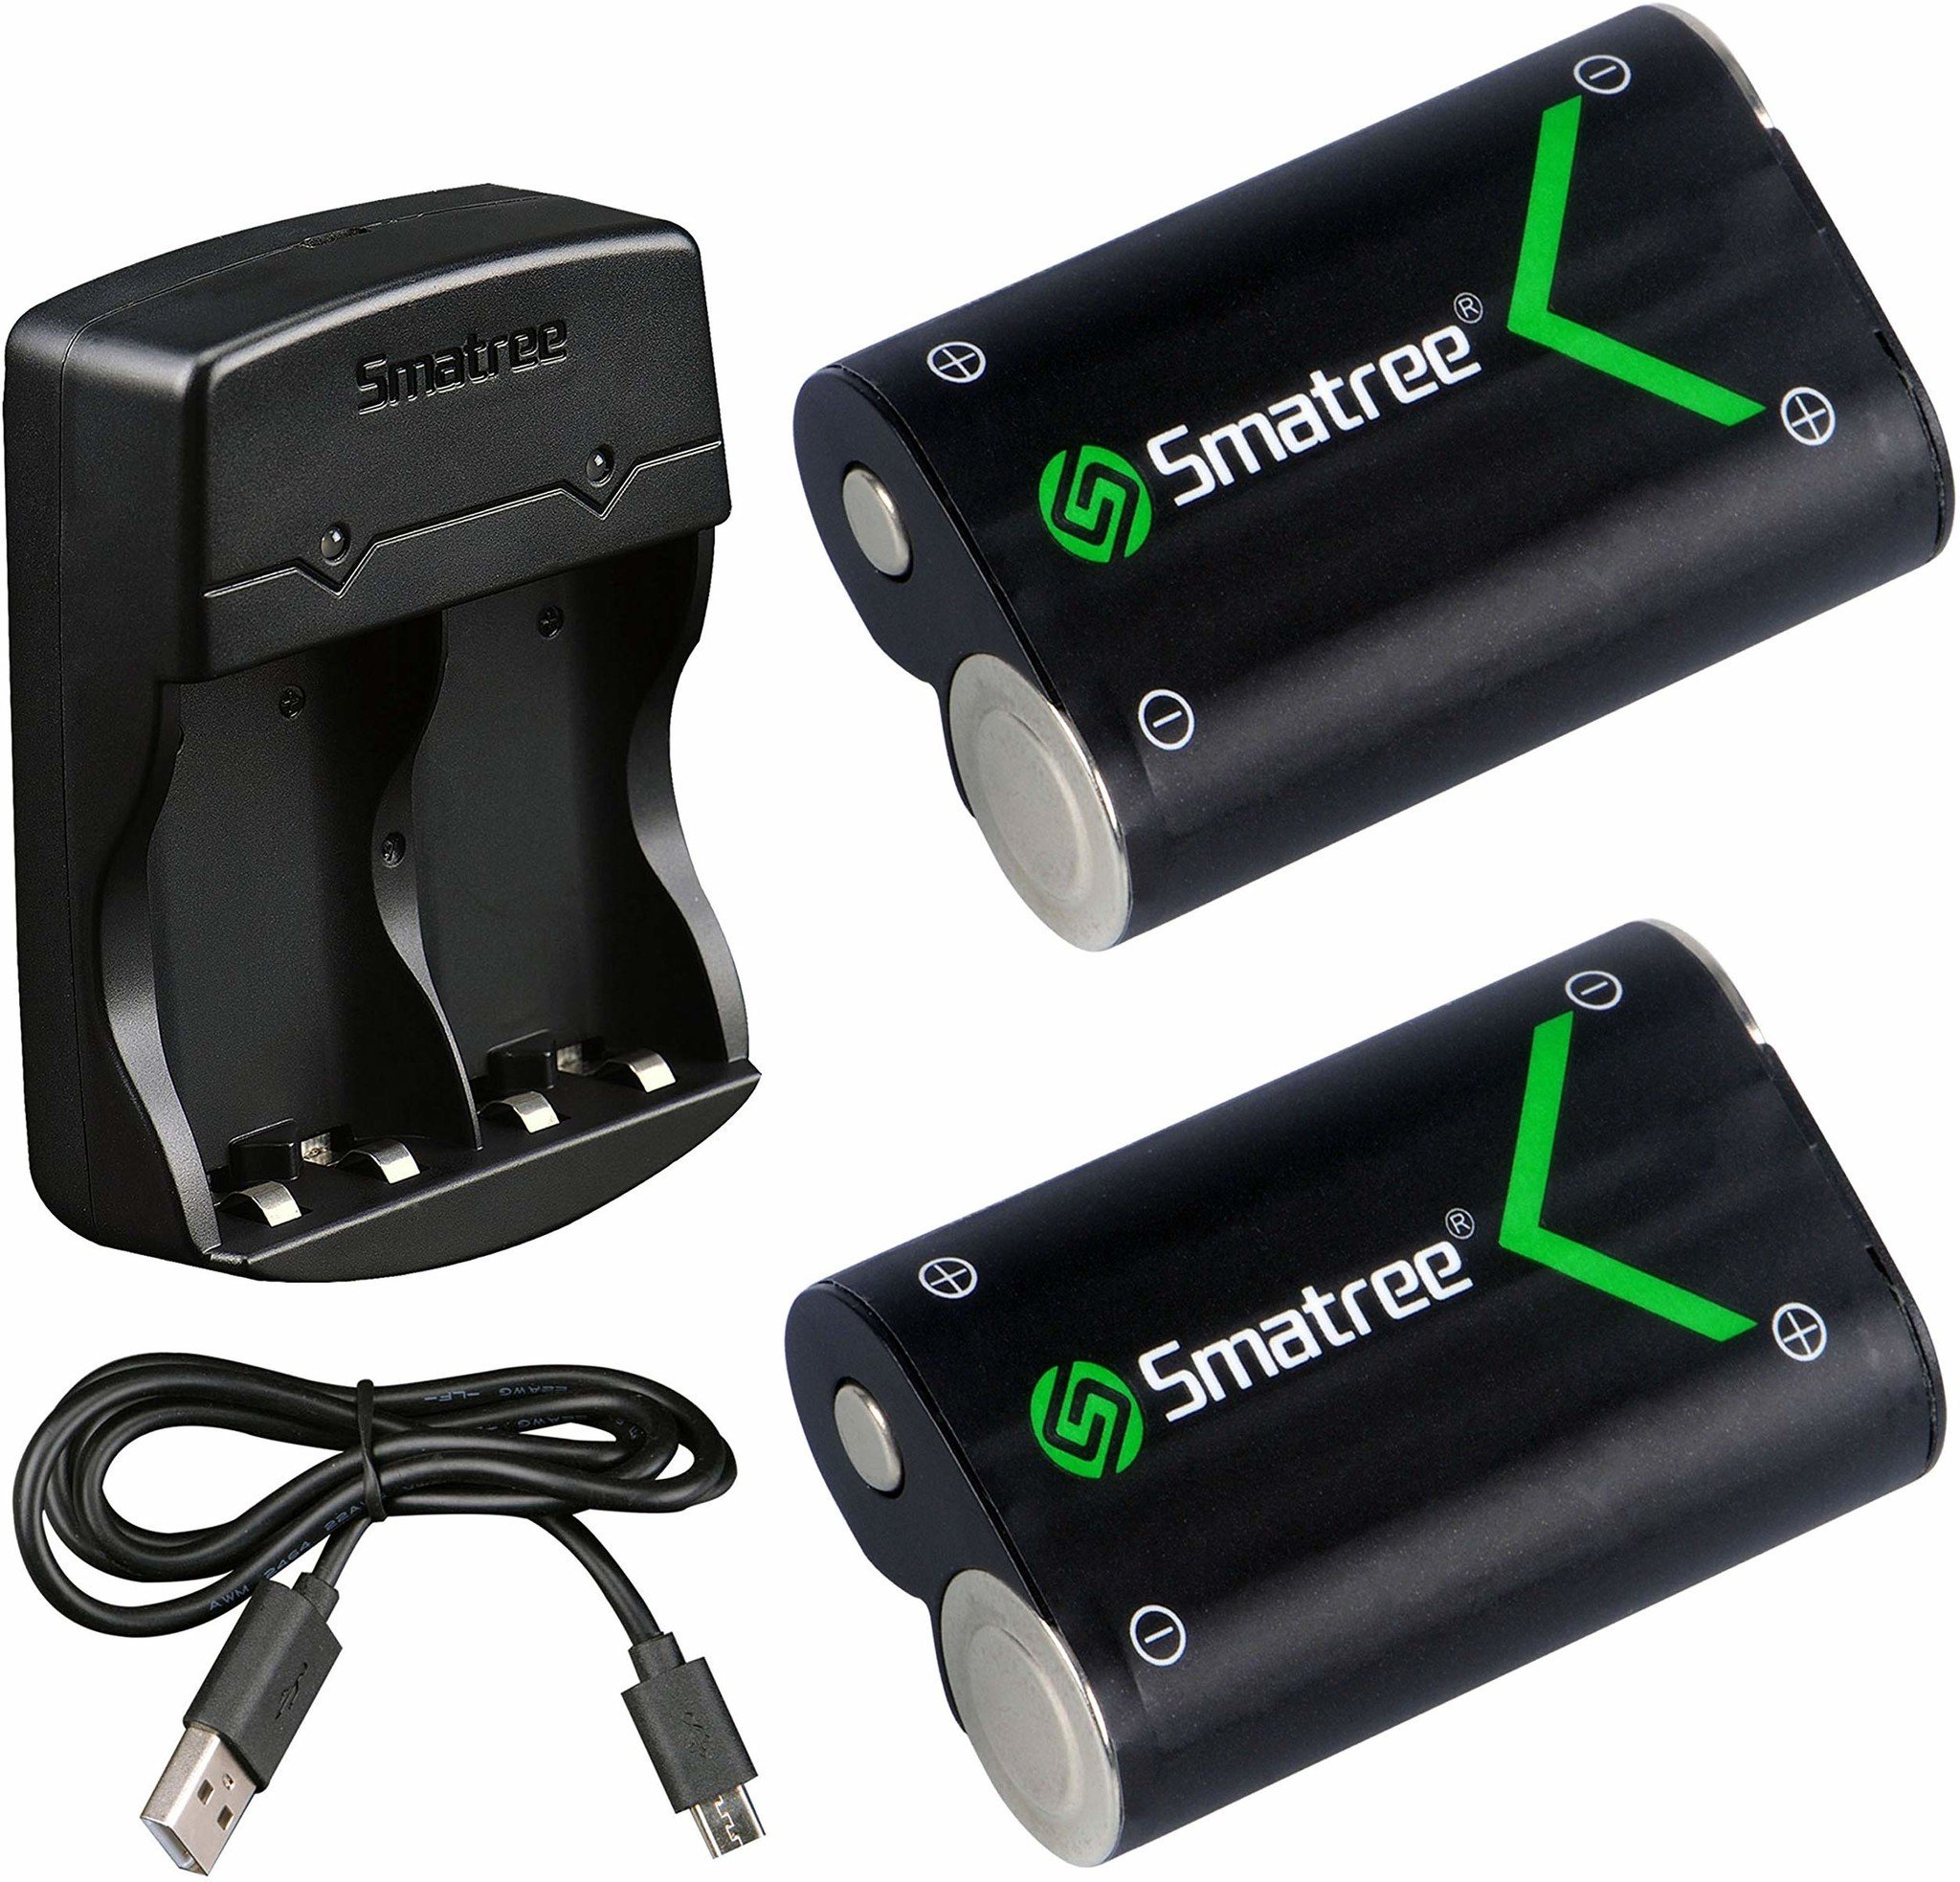 Smatree Xbox rechargeable batteries